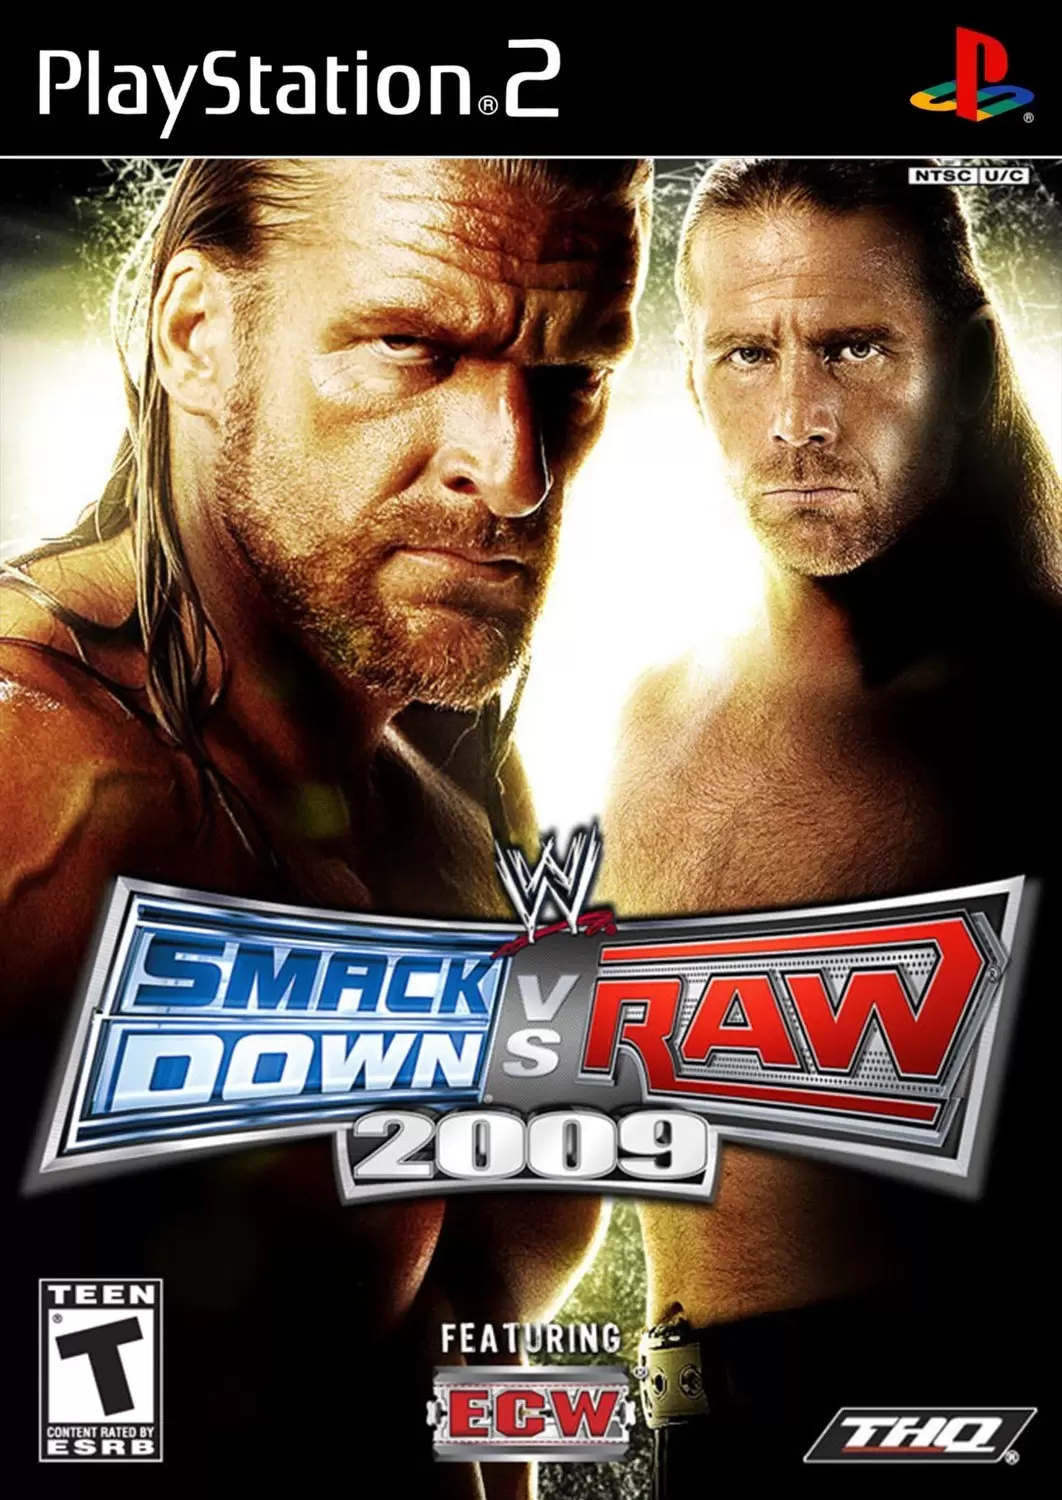 PS2 Games - WWE SmackDown vs. Raw 2009